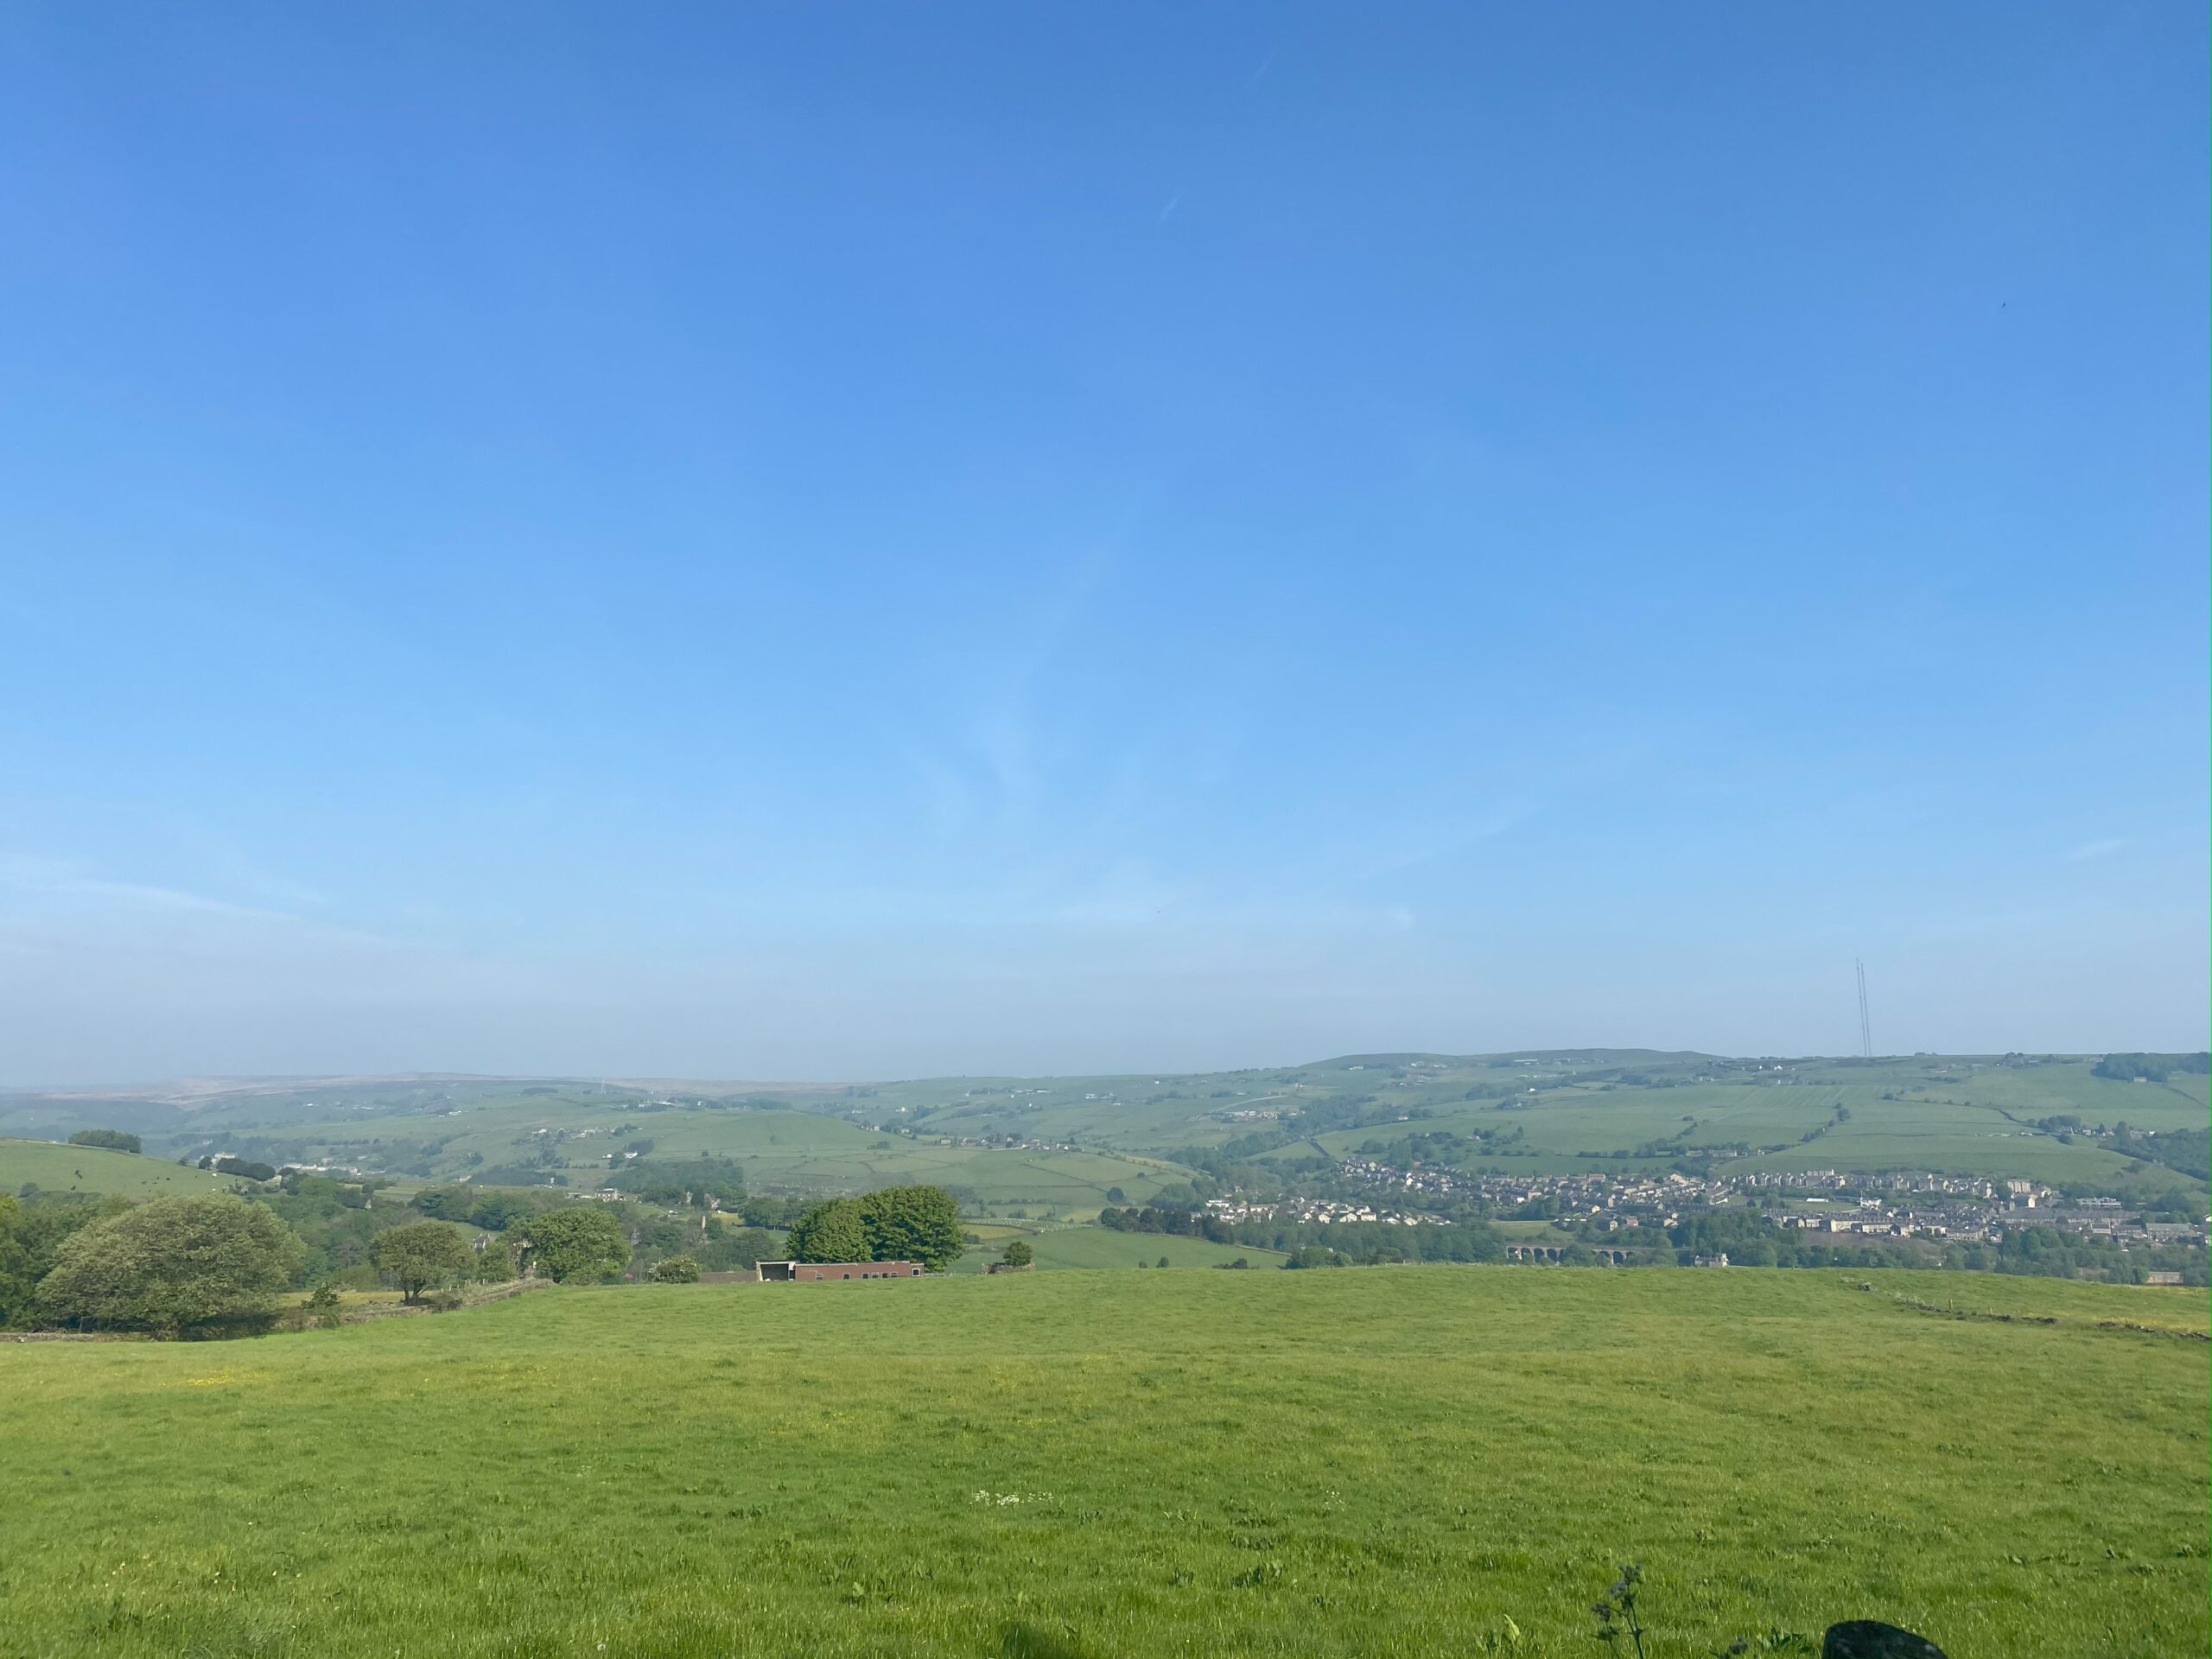 A photograph of the landscape in Huddersfield, West Yorkshire, where VISTA is based.